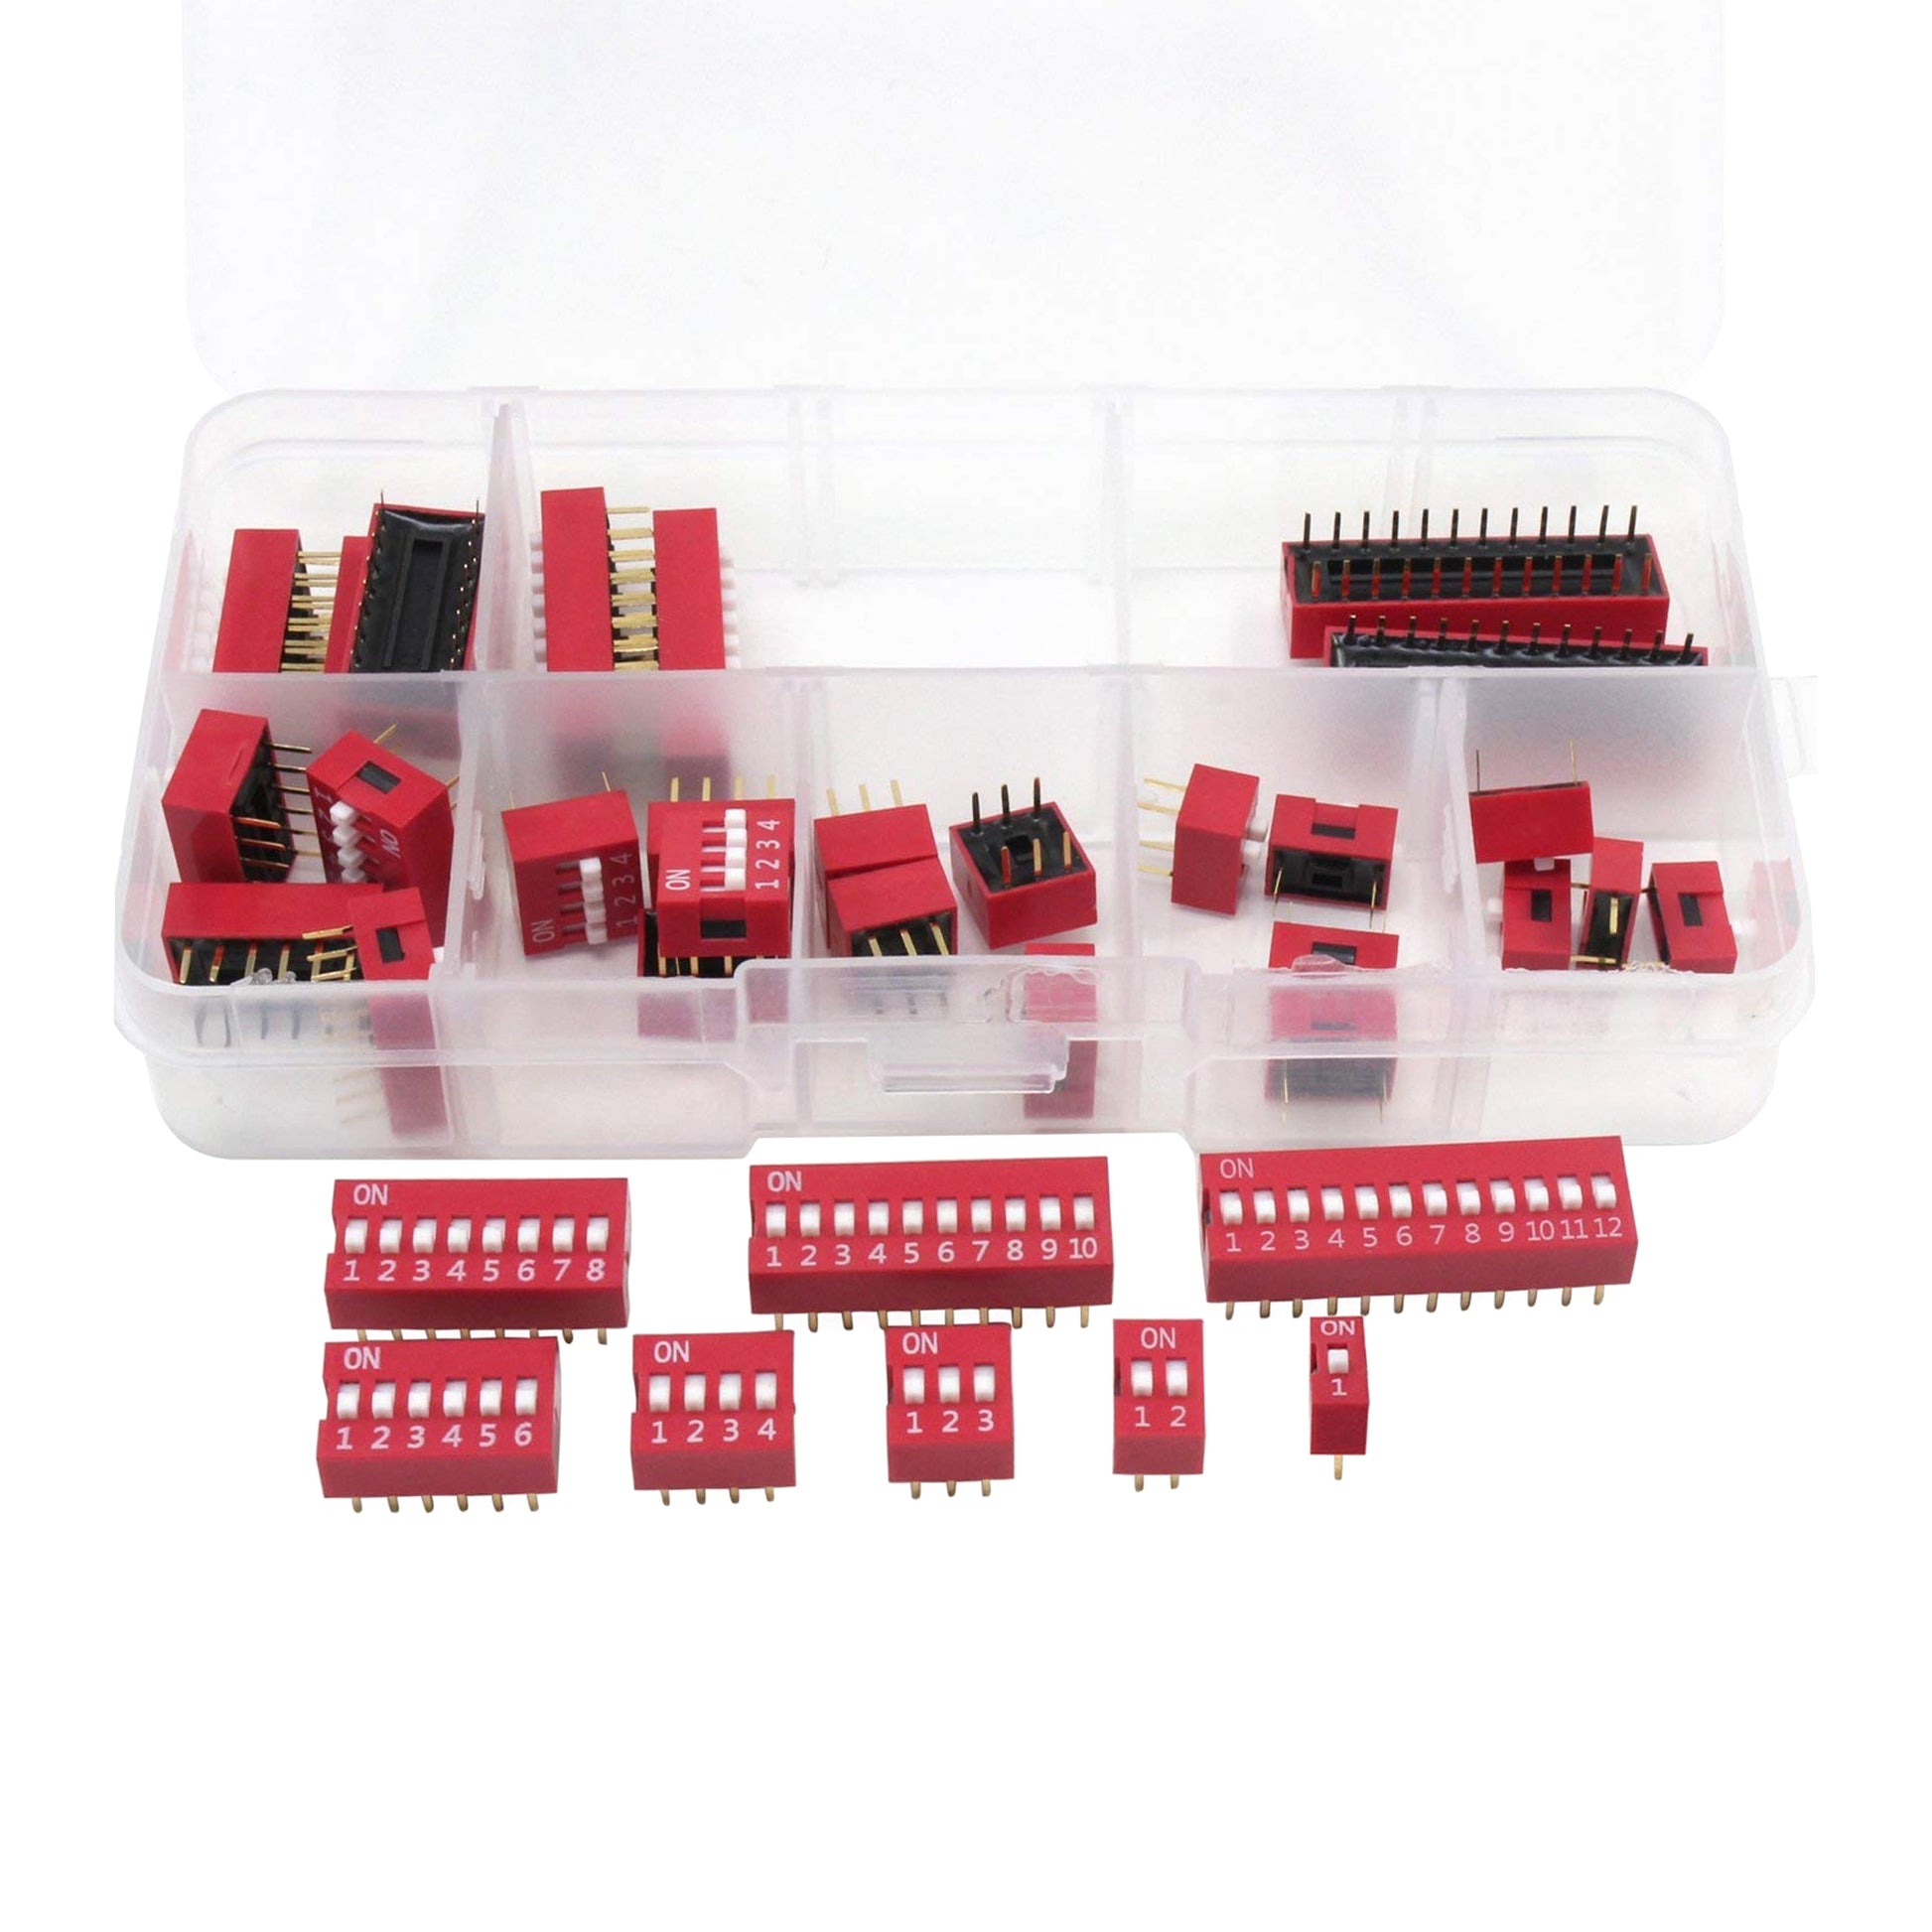 45pcs DIP Switch 2.54mm Pitch Code Switch 1/2/3/4/5/6/7/8/9P Kit, Slide Type for PCB, Breadboard Assorted DIP Switch Kit - RS1852 - REES52